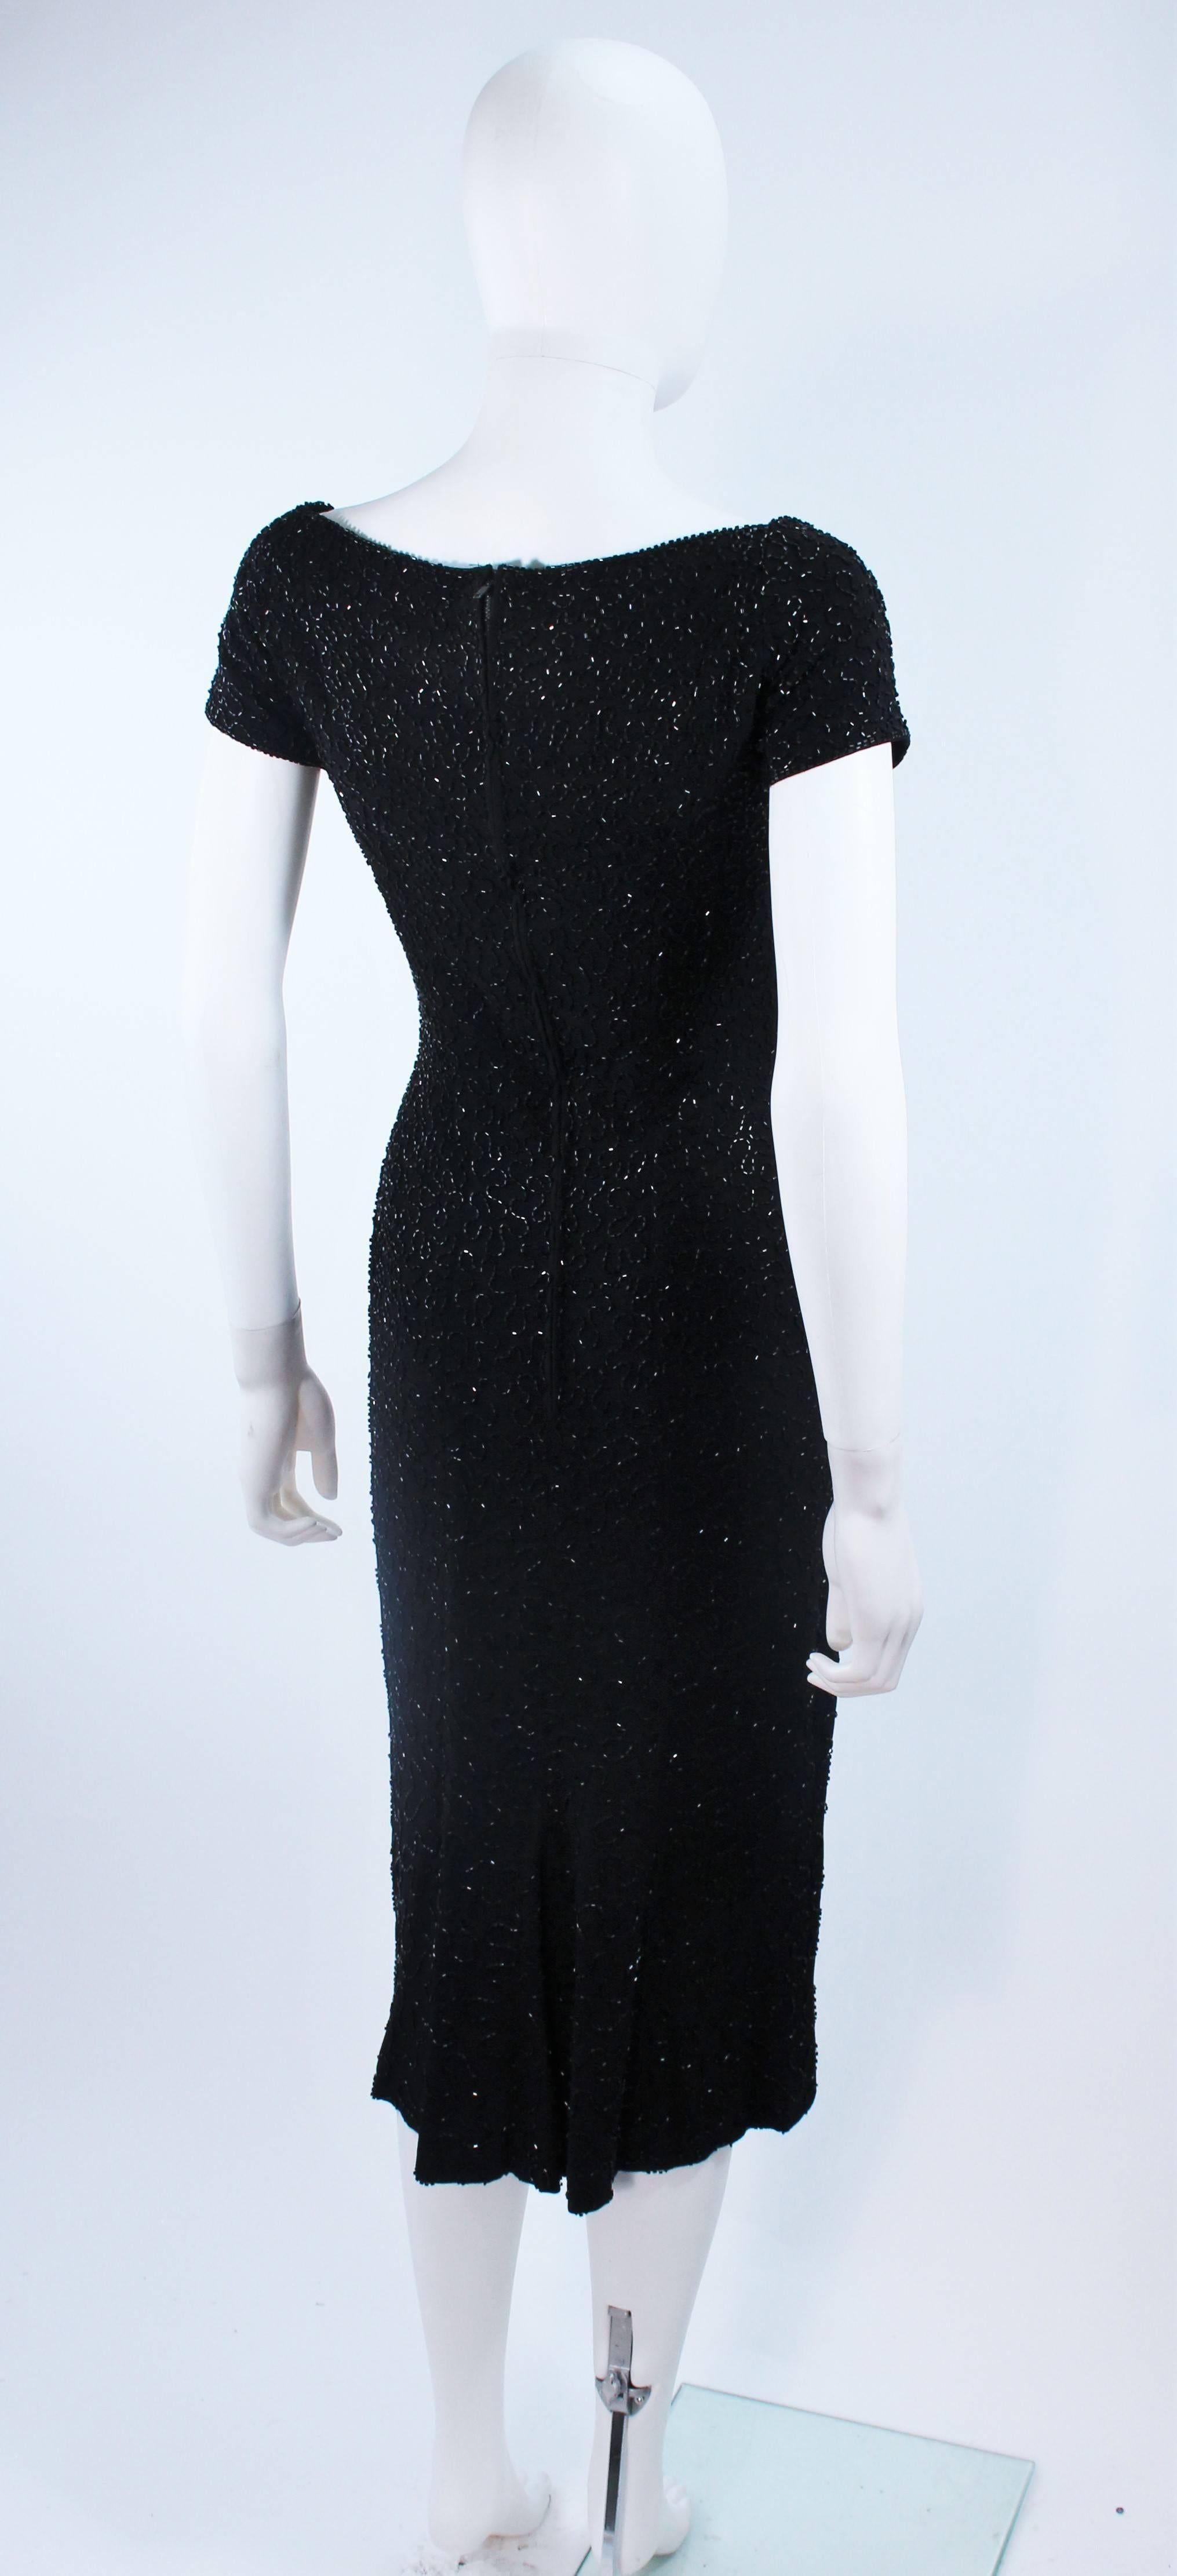 CEIL CHAPMAN Black Beaded Cocktail Dress with Square Neckline Size 2 For Sale 4